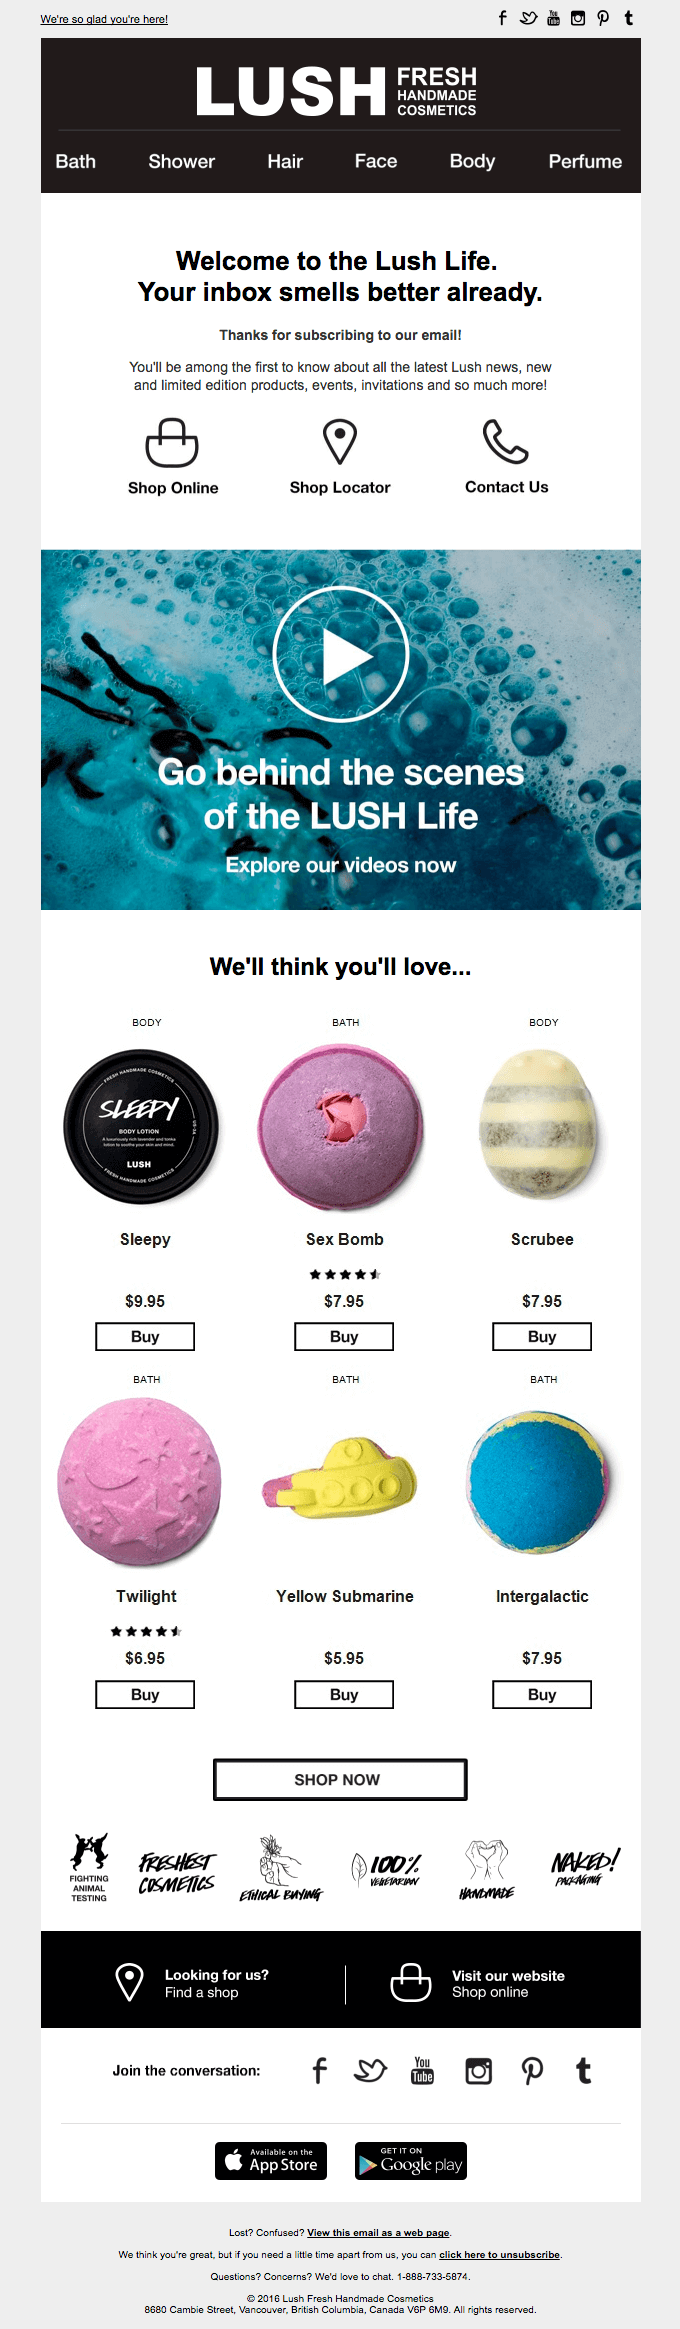 lush welcome email campaign new subscription email list popular products product recommendation engines